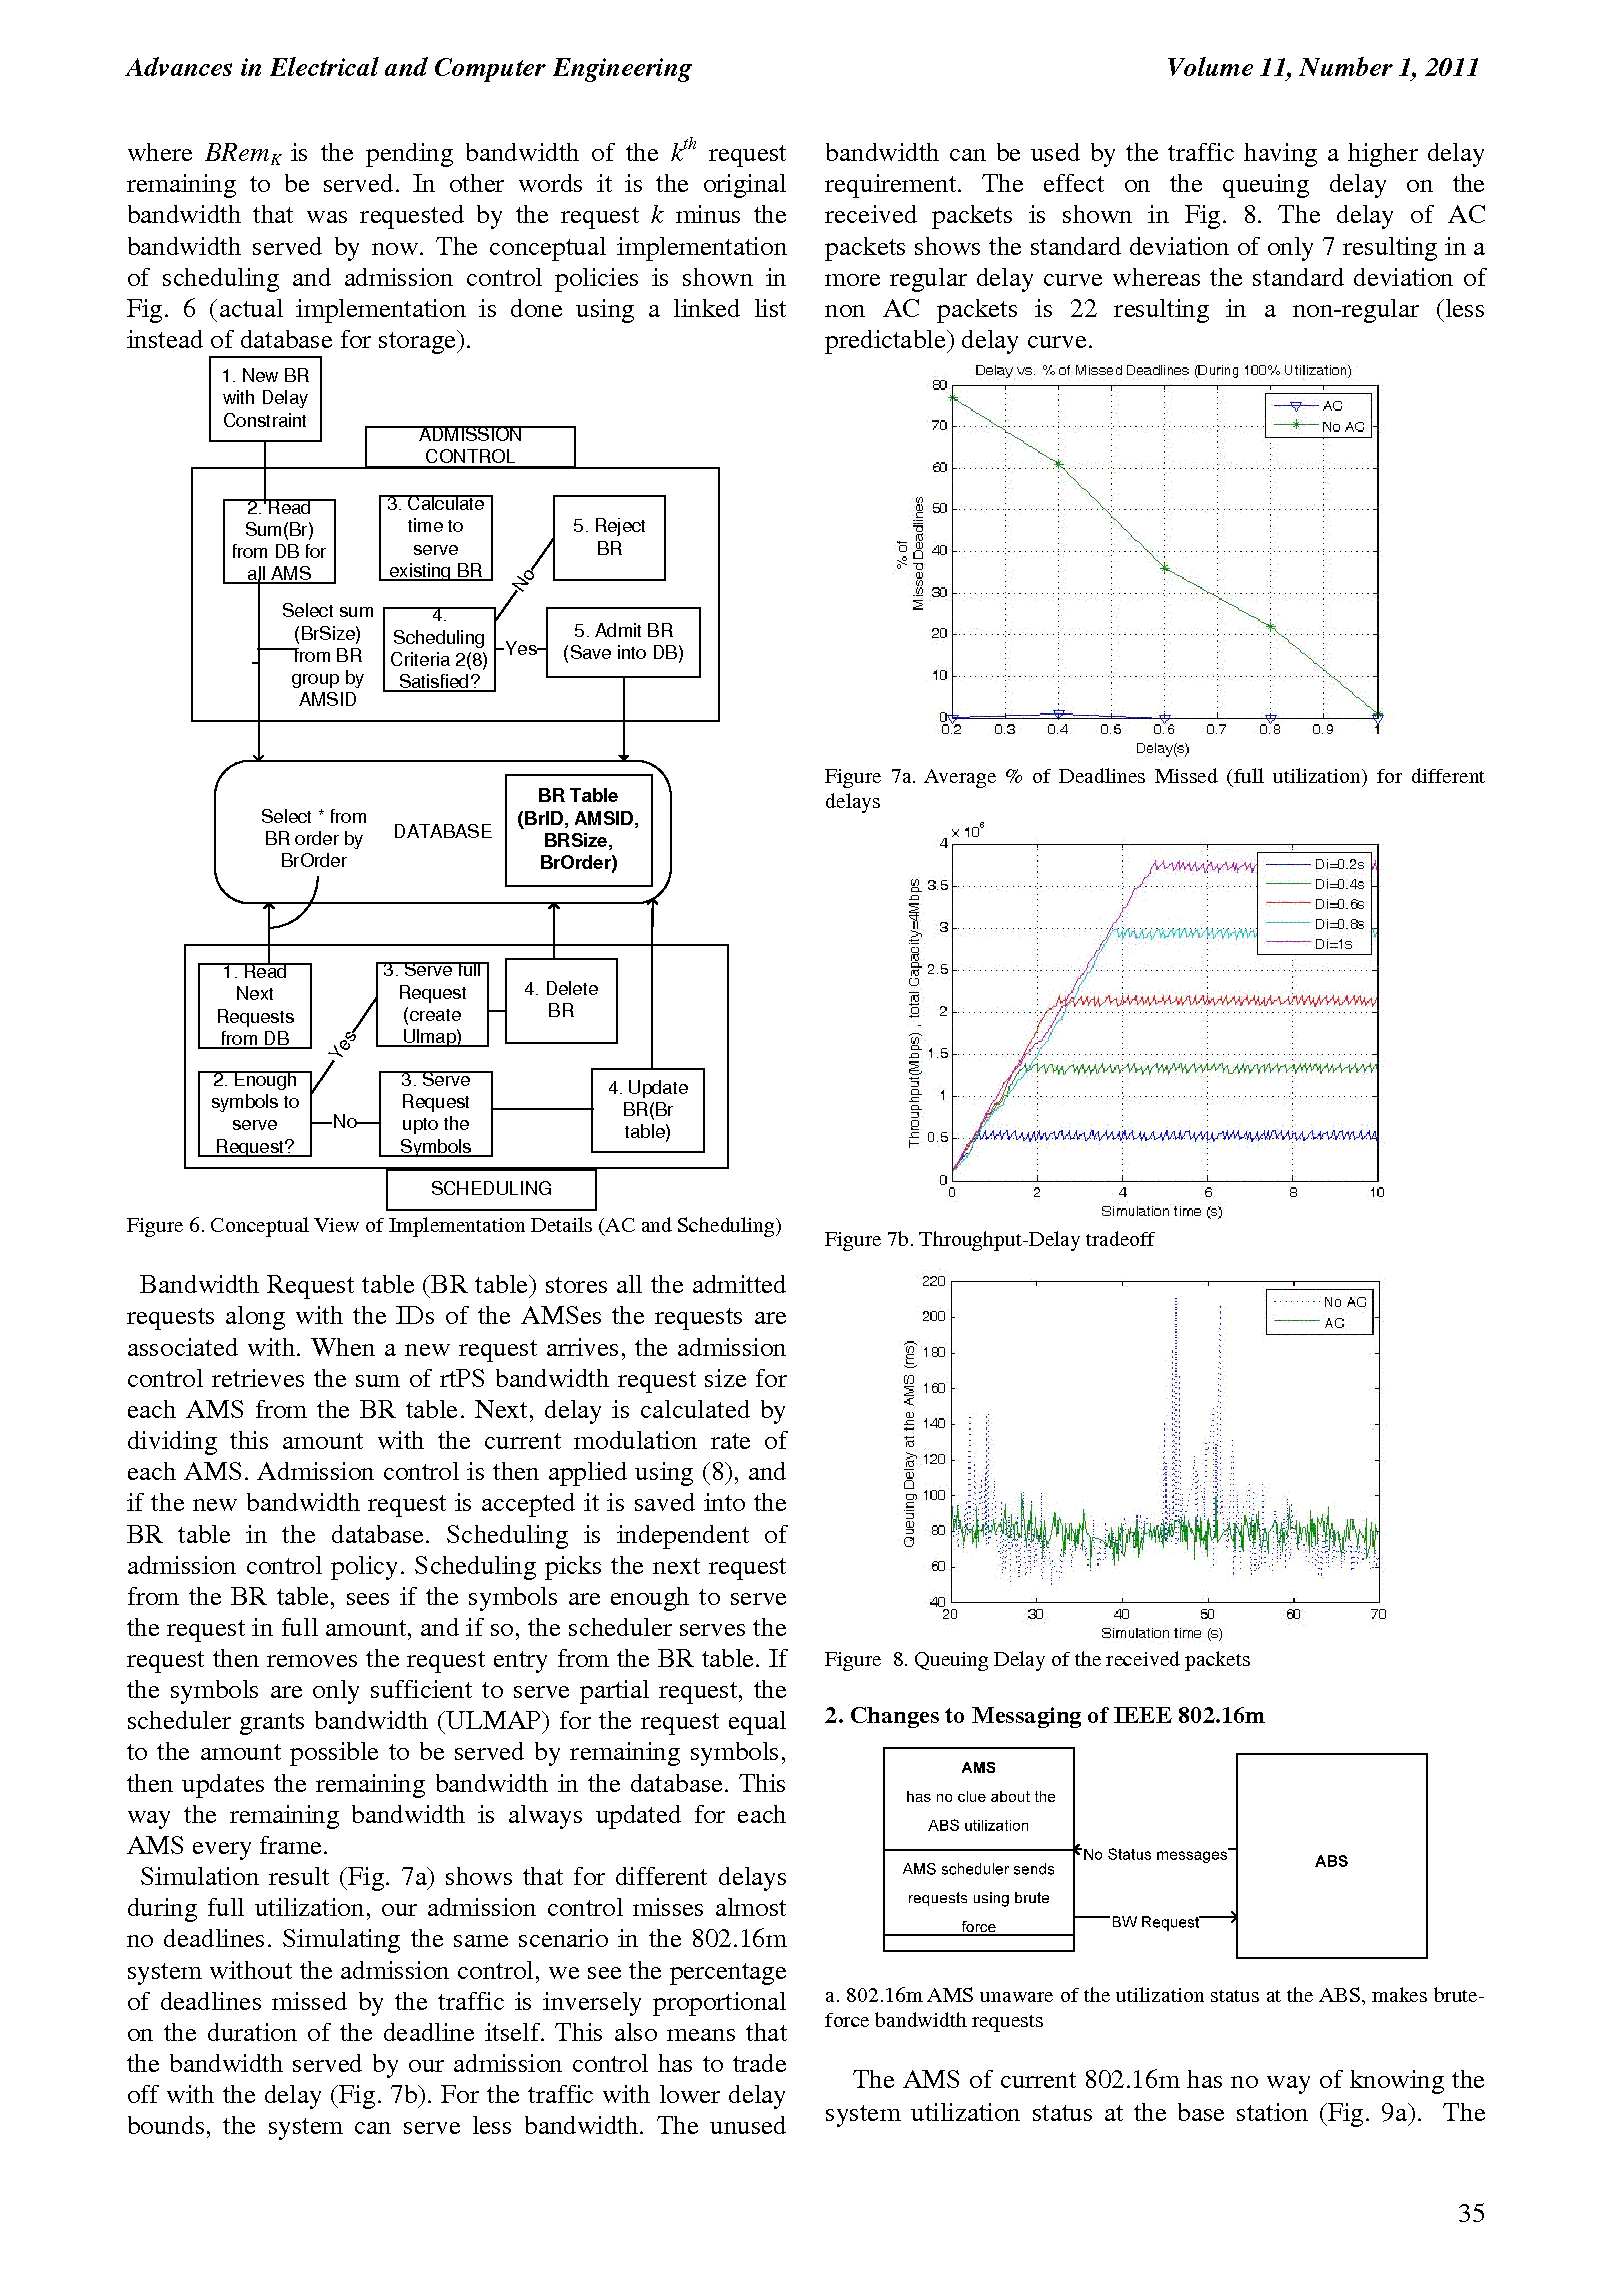 PDF Quickview for paper with DOI:10.4316/AECE.2011.01005